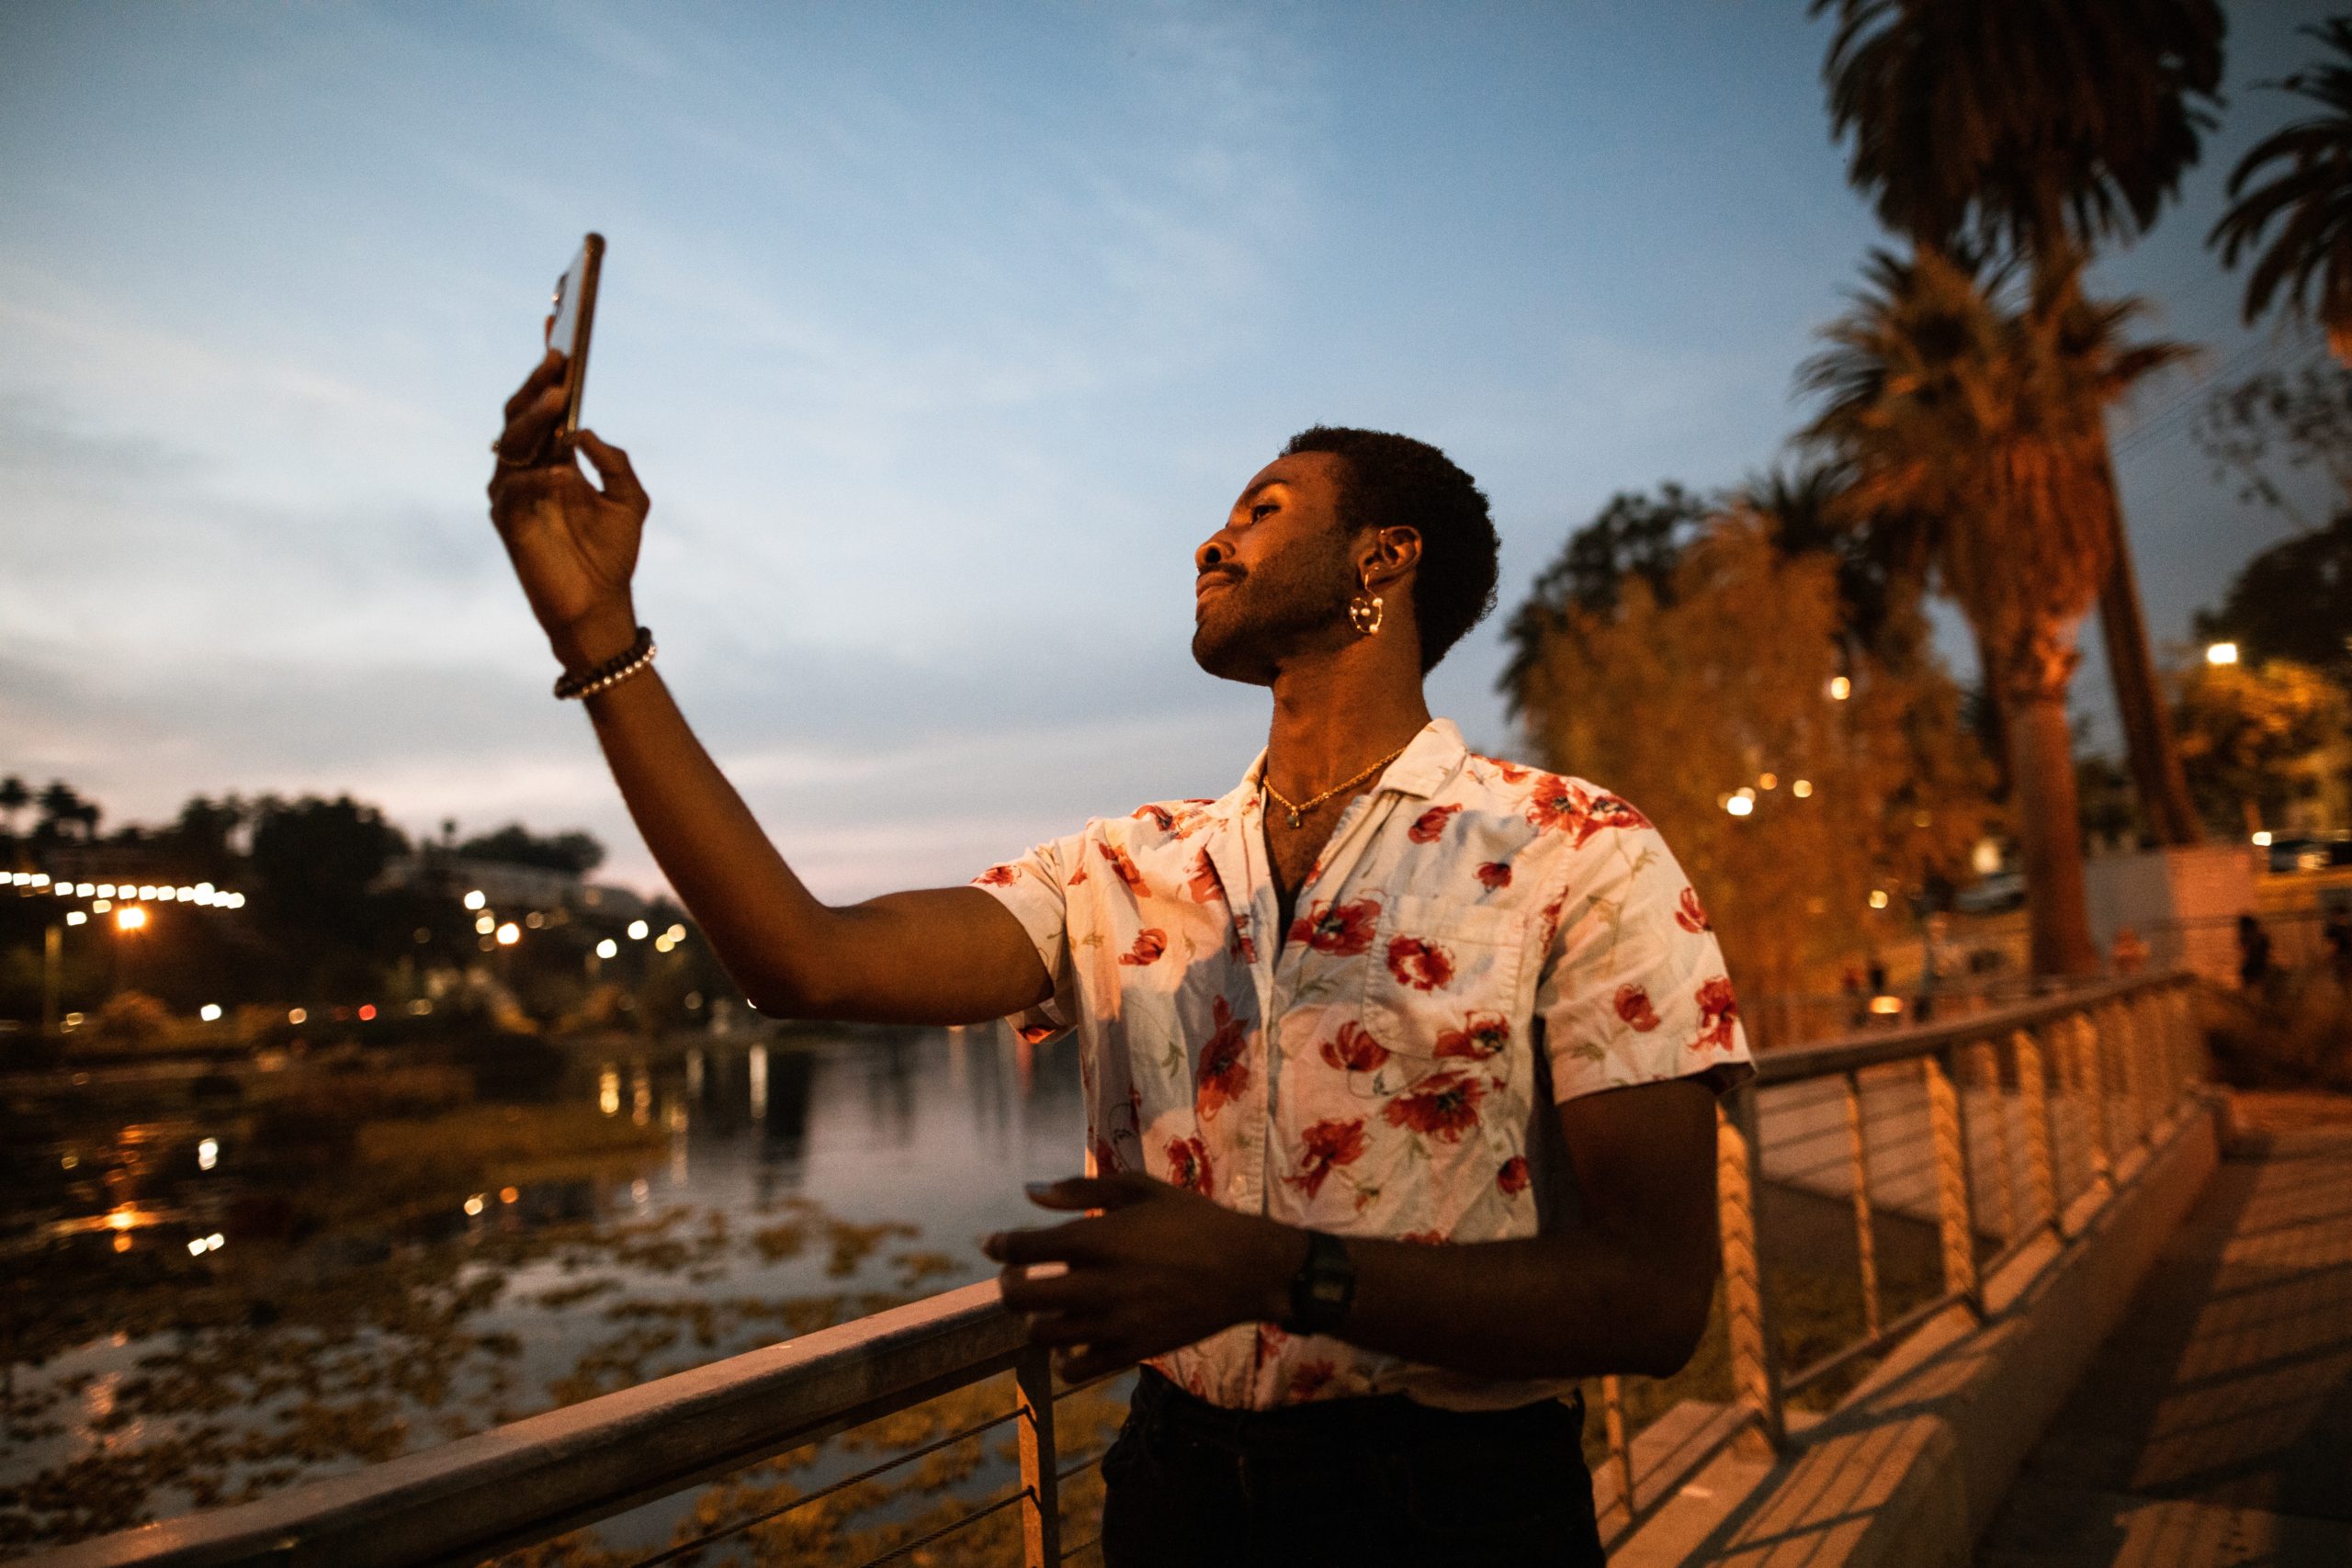 Man standing outside near palm trees and water talking a selfie